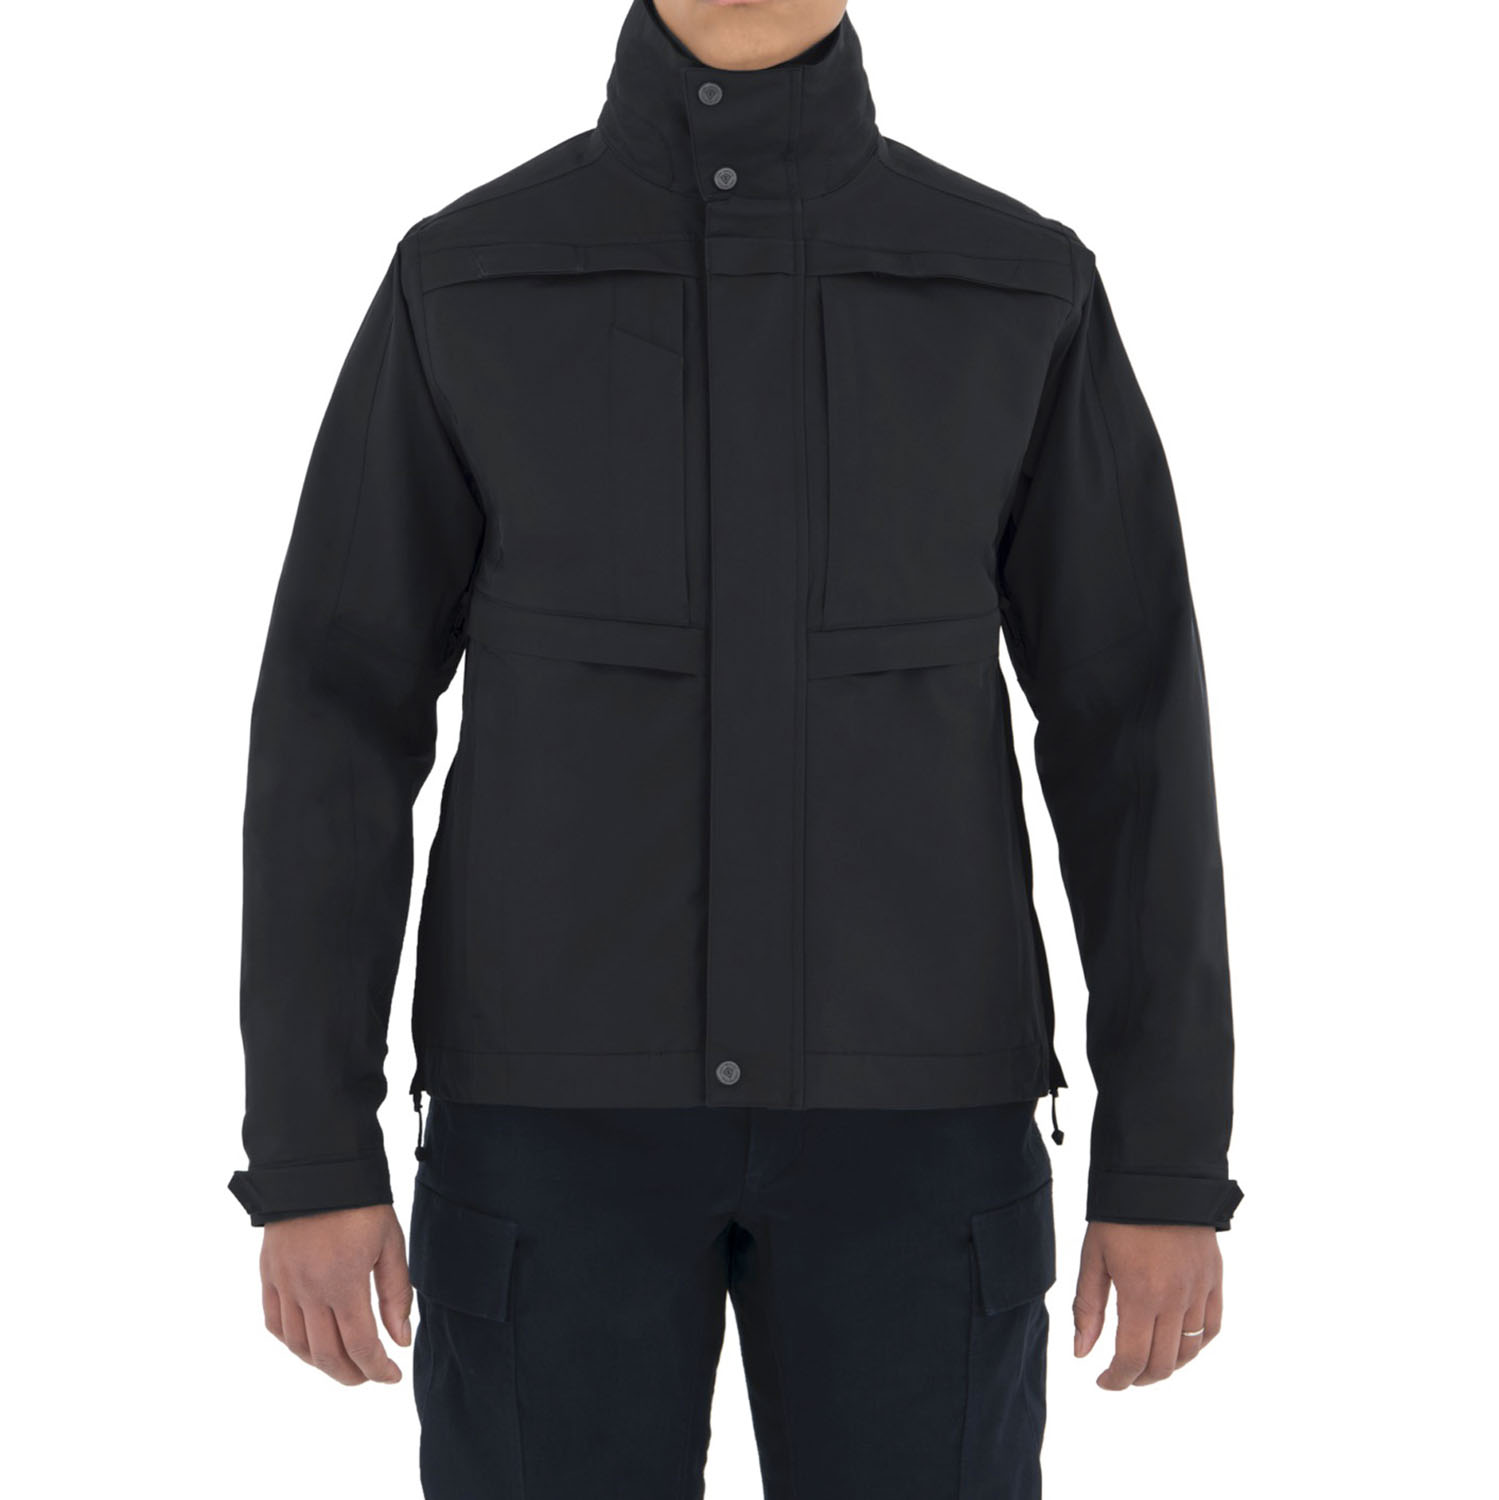 FIRST TACTICAL WOMEN'S TACTIX SYSTEM JACKET